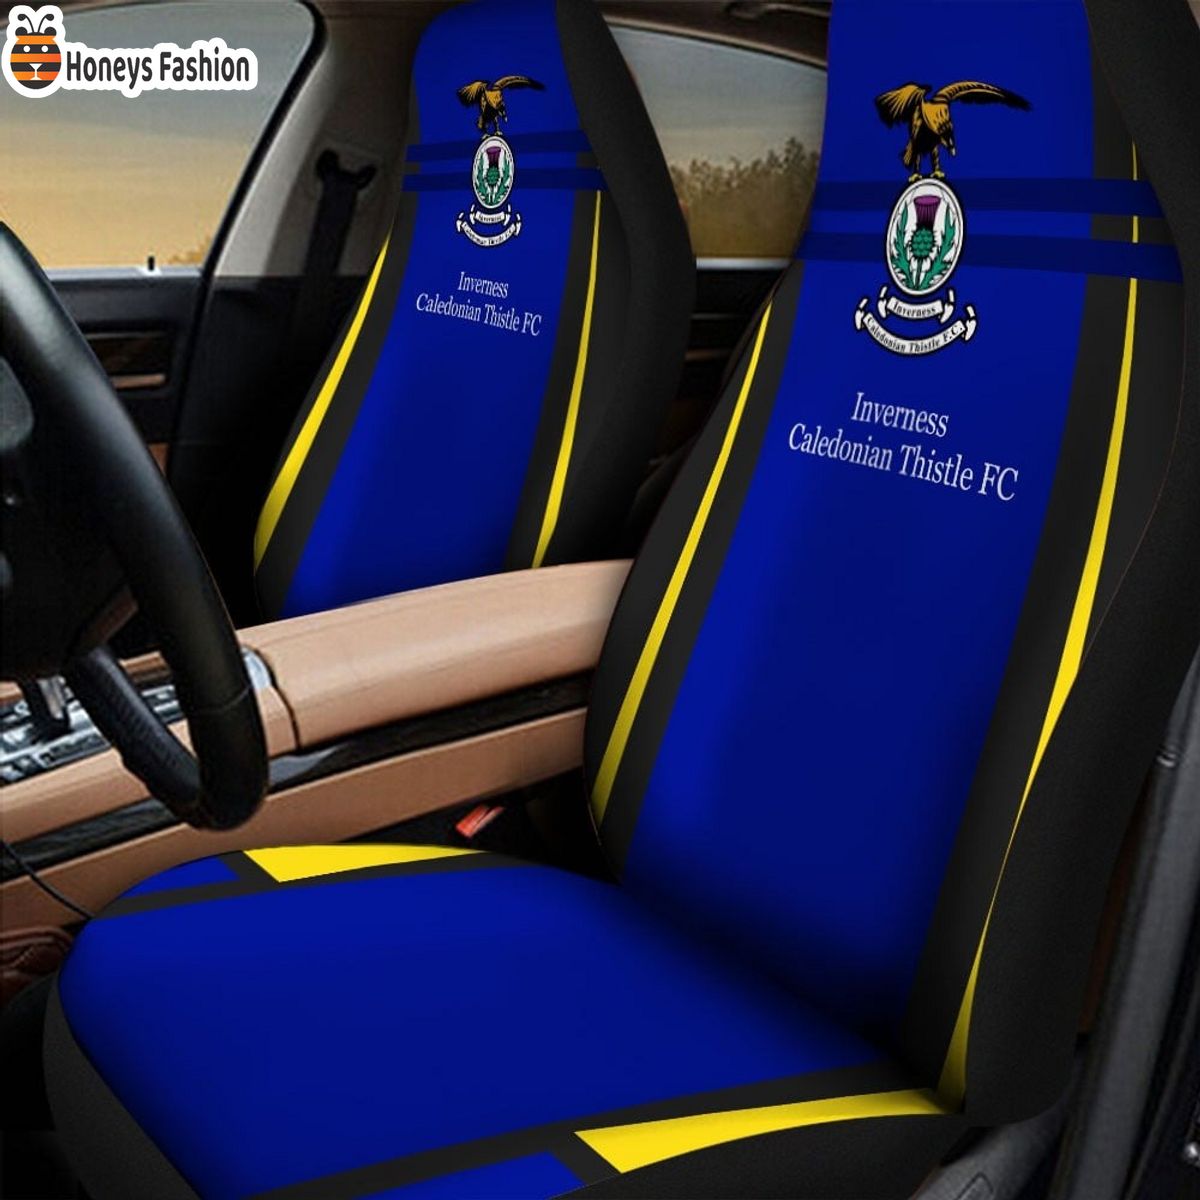 Inverness Caledonian Thistle F.C. car seat cover